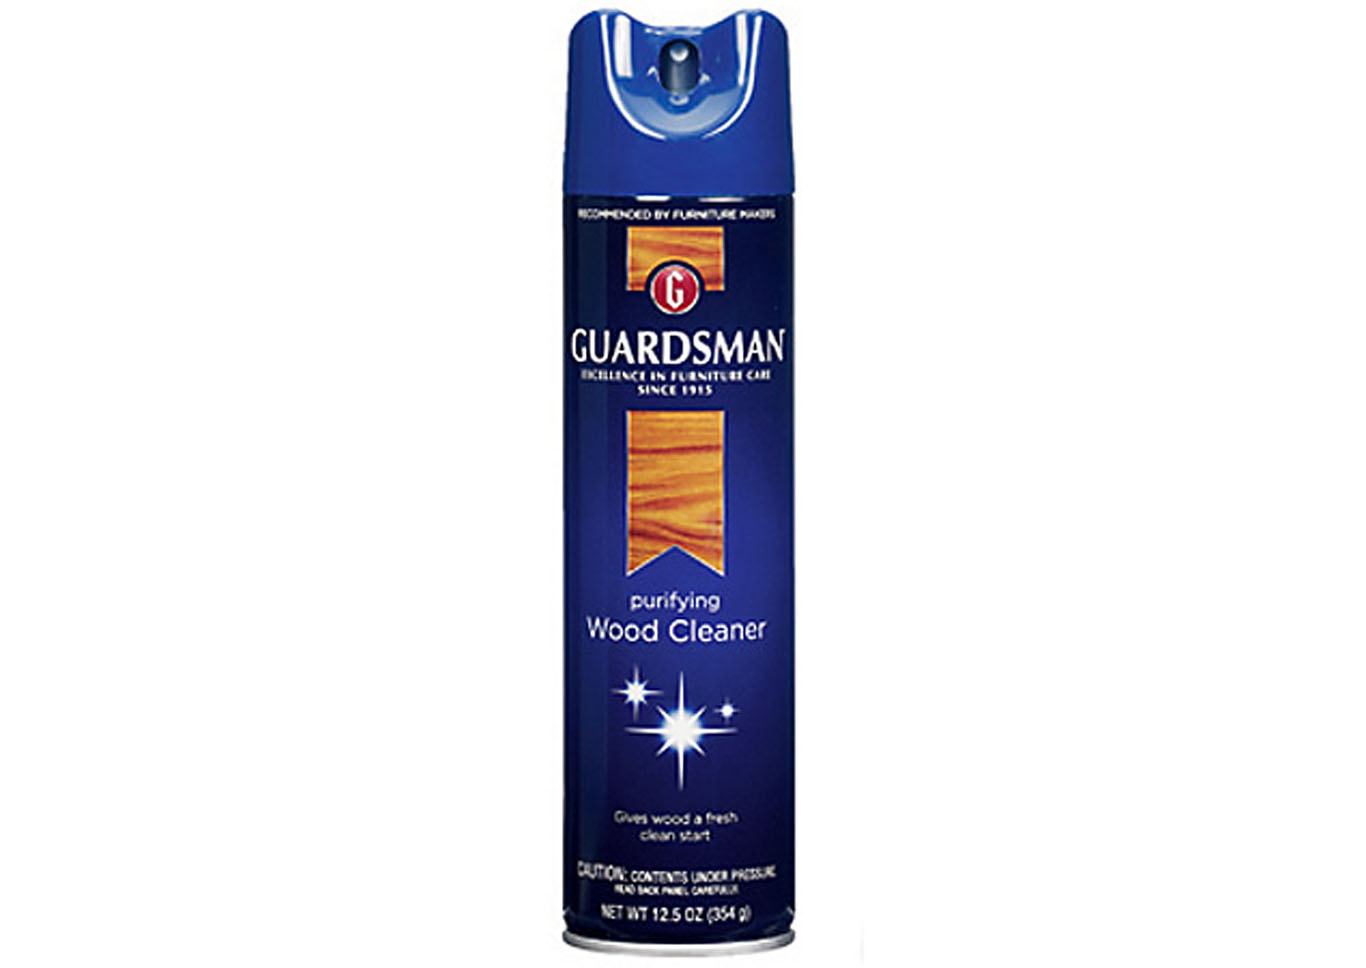 Guardsman Purifying Wood Cleaner,Instore